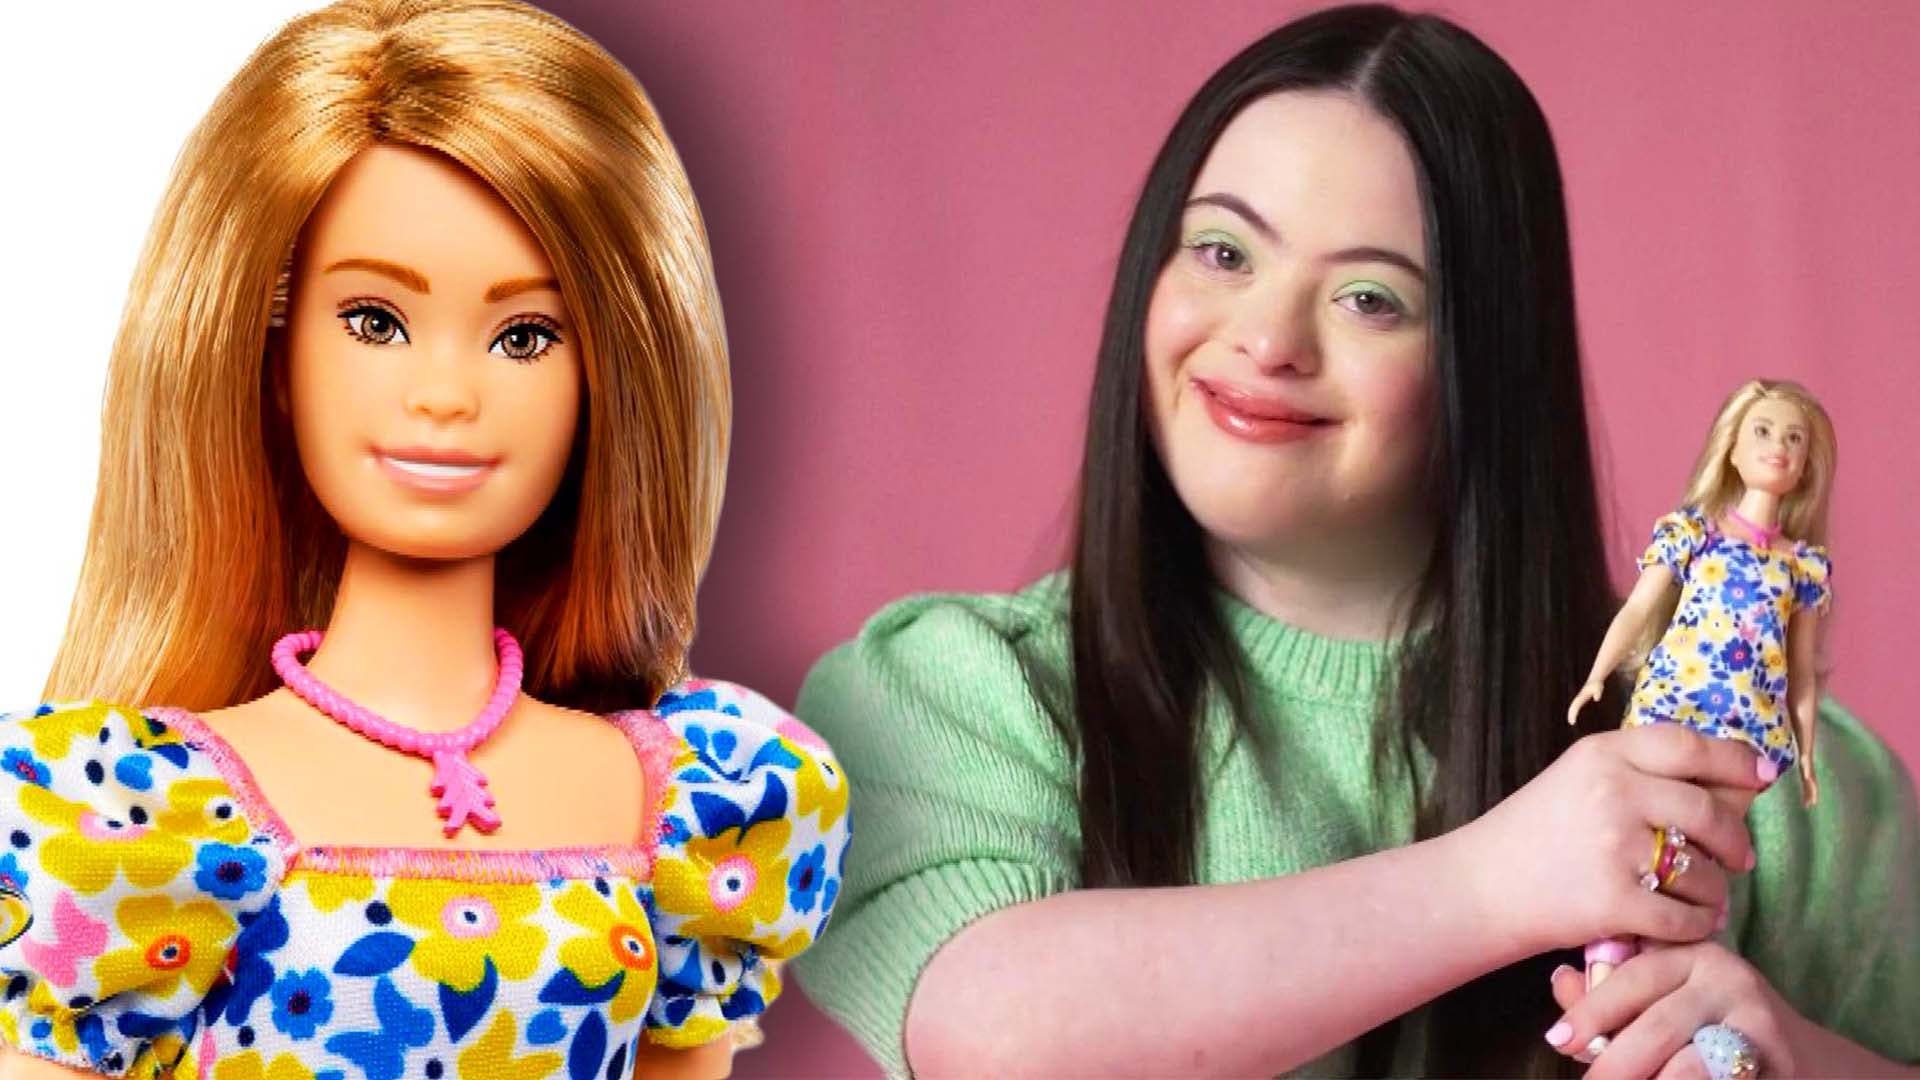 Barbie With Down Syndrome Makes Doll Line More Inclusive | Inside Edition